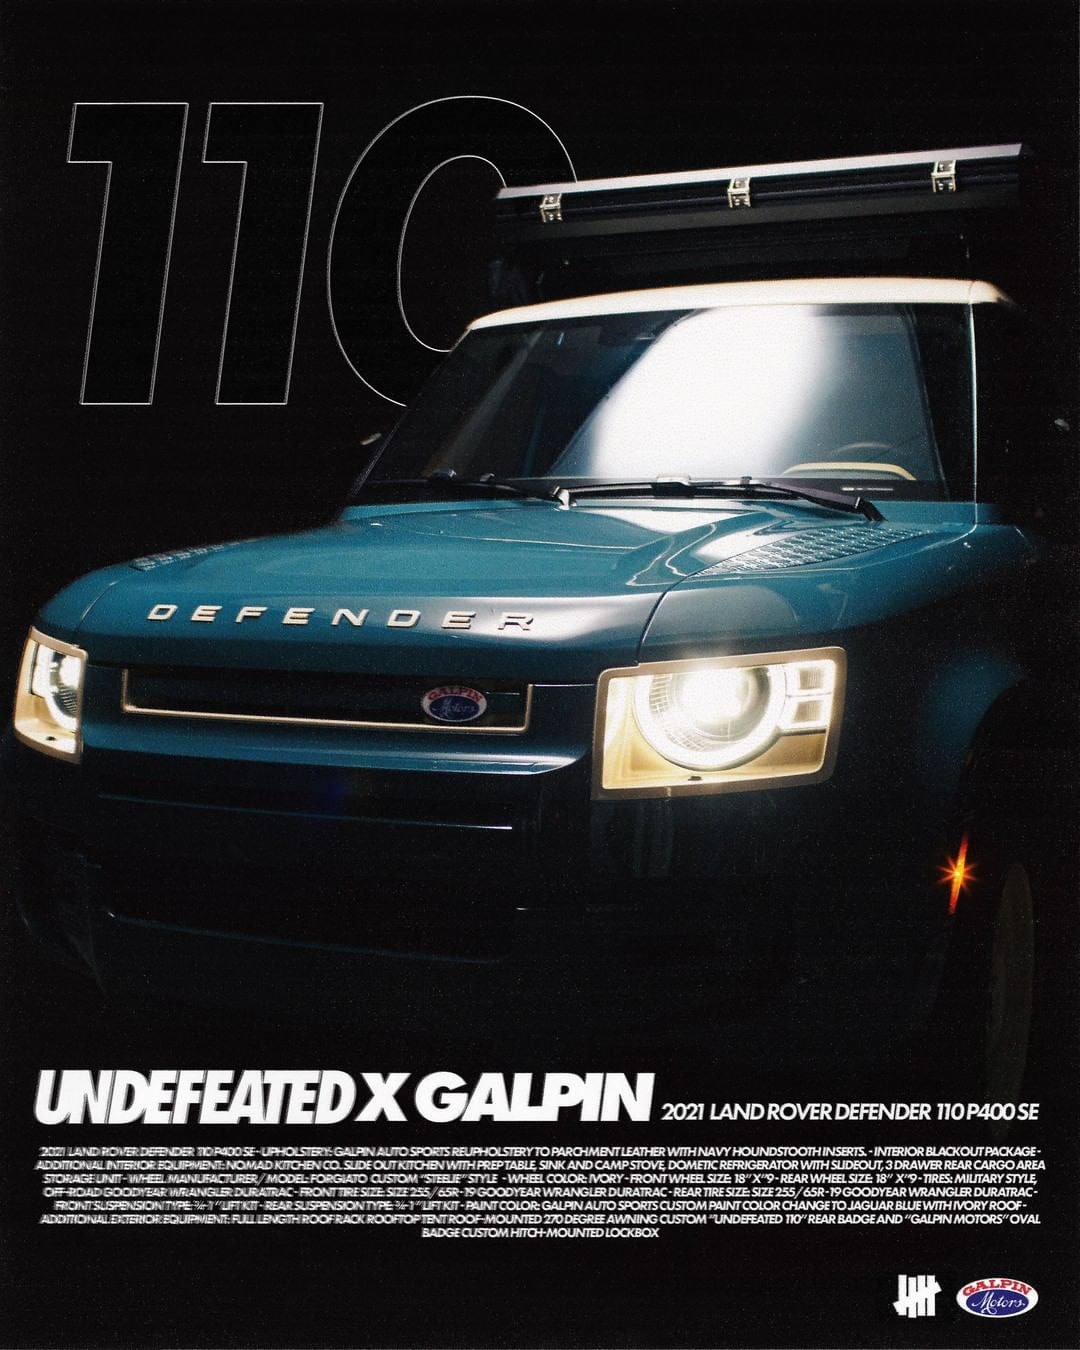 UNDEFEATED and Galpin Motors Reveal Two Custom Land Rovers Defnder 110 90 pimp my ride leather houndstooth beach towel tent slide out kitchen nomad  ivory steelie forgiato rims p400 release info